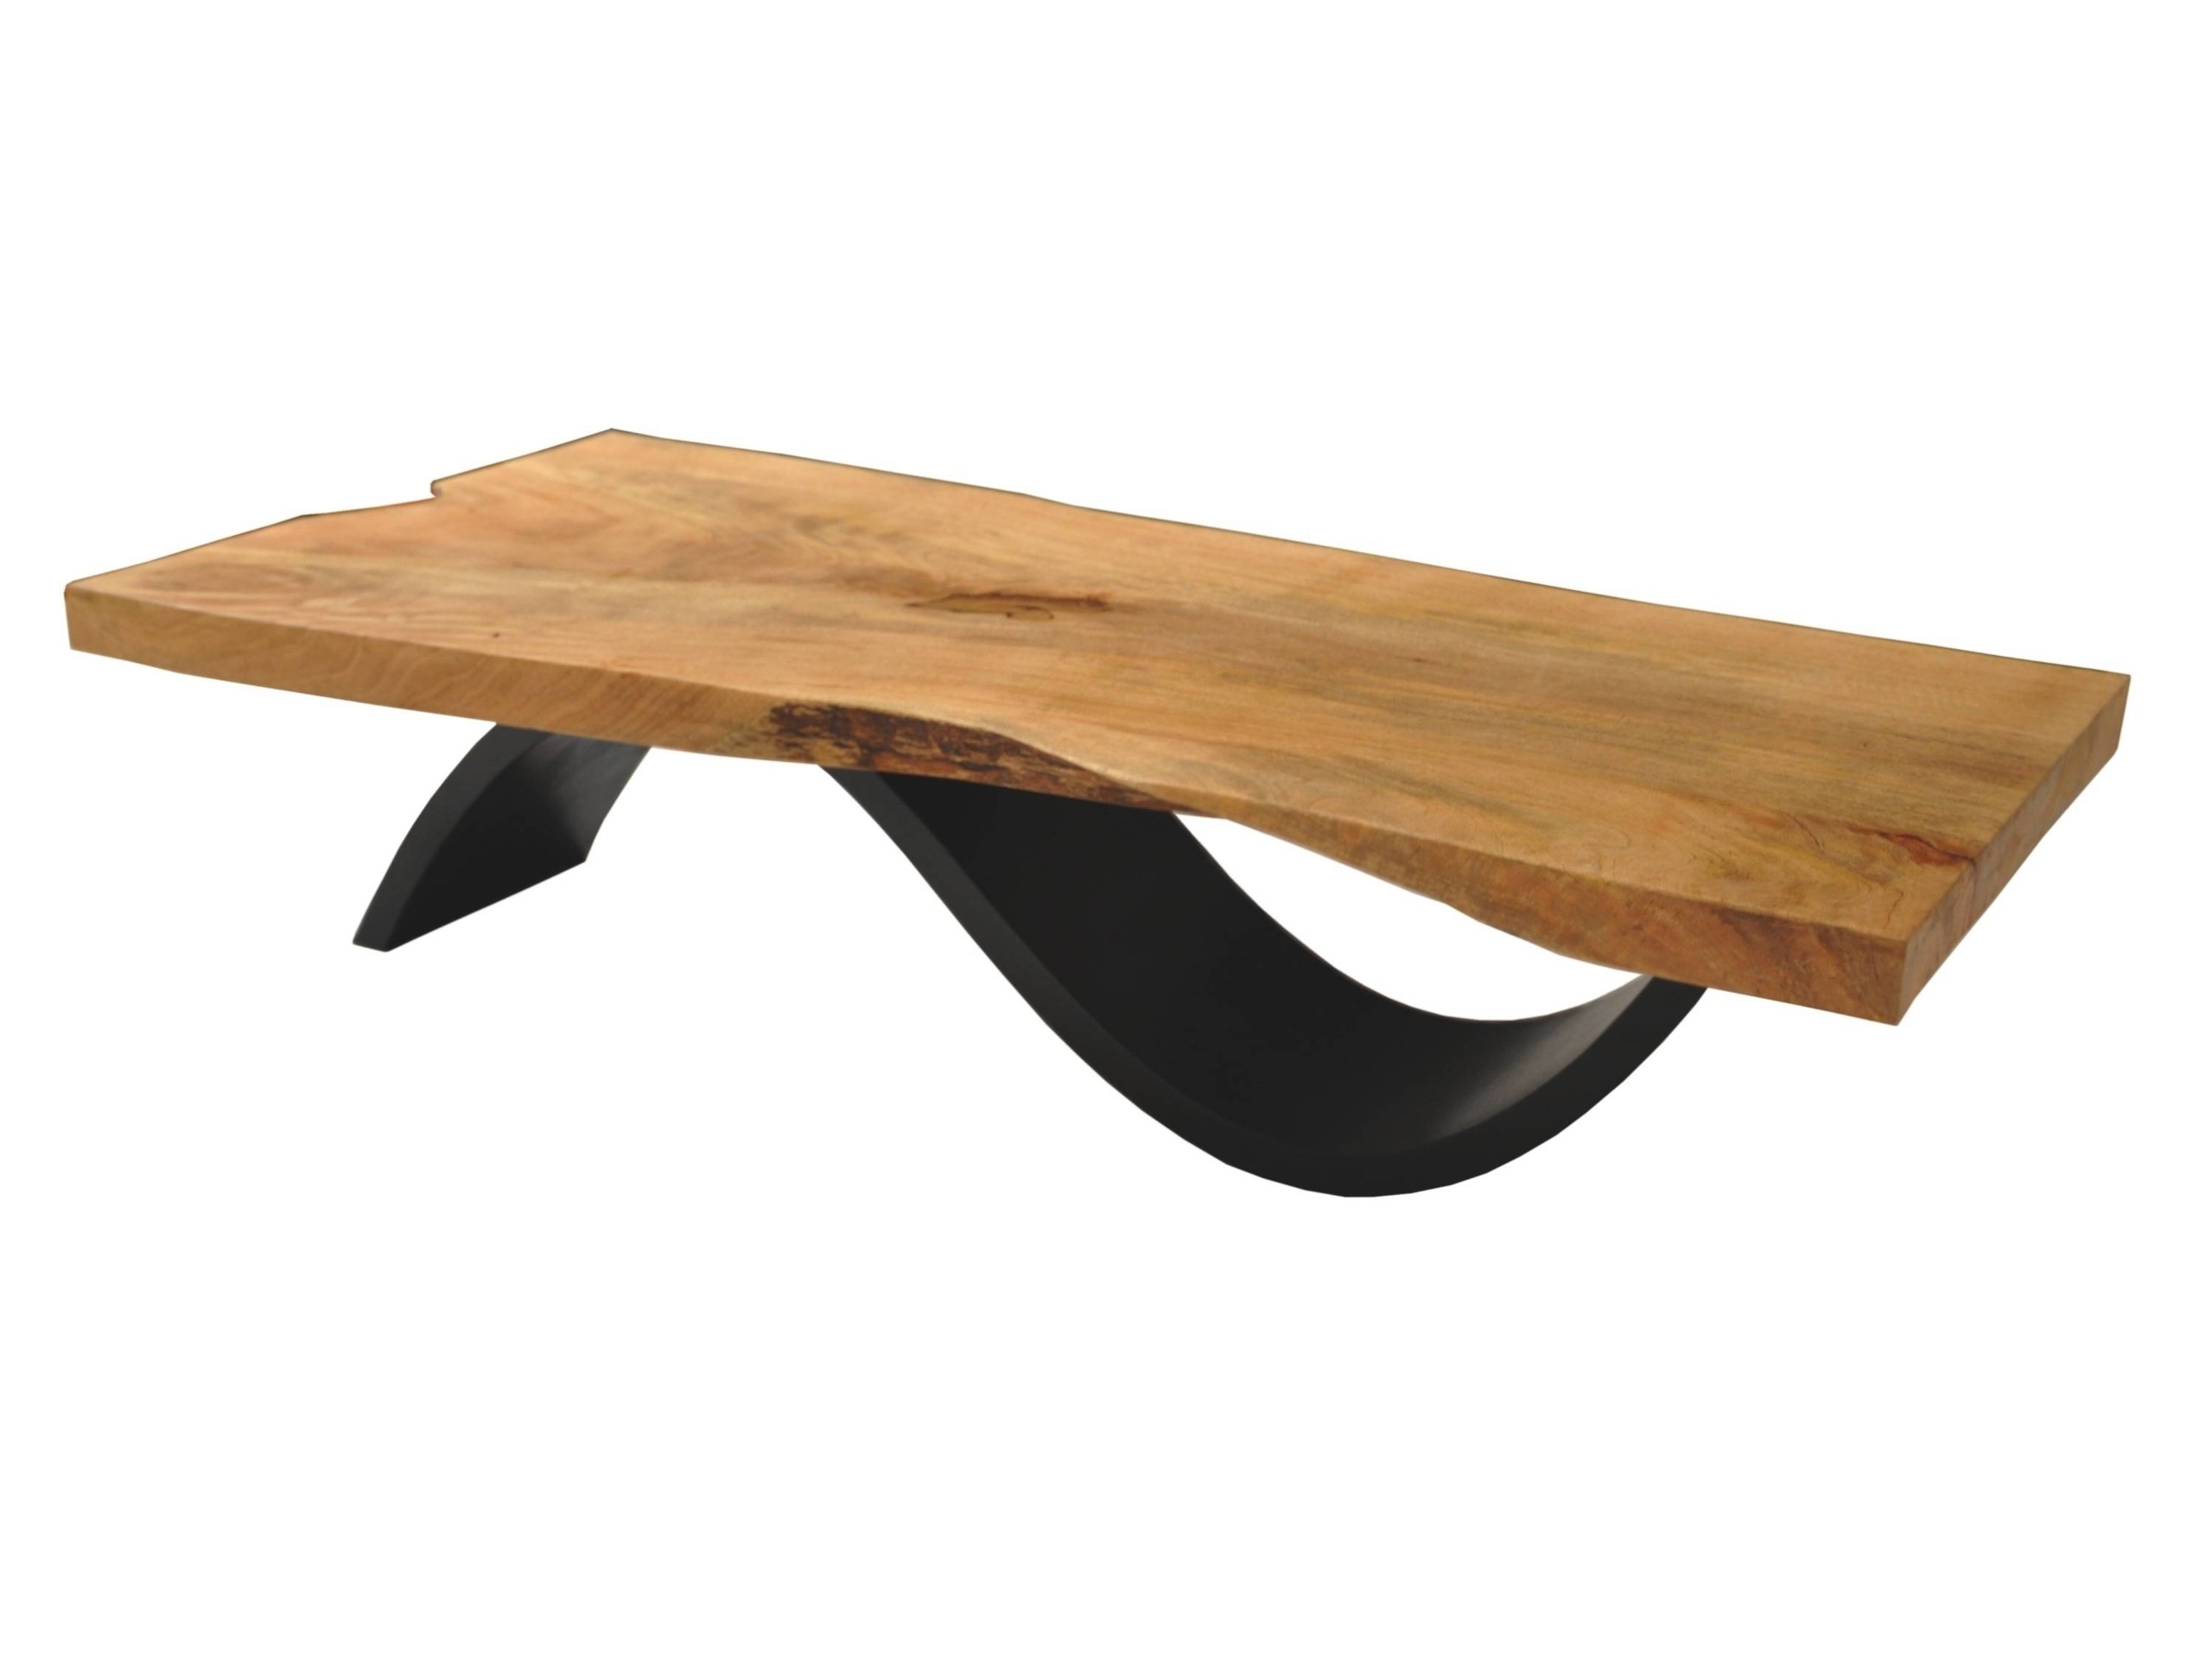 Contemporary coffee table made of reclaimed wood with curvy black